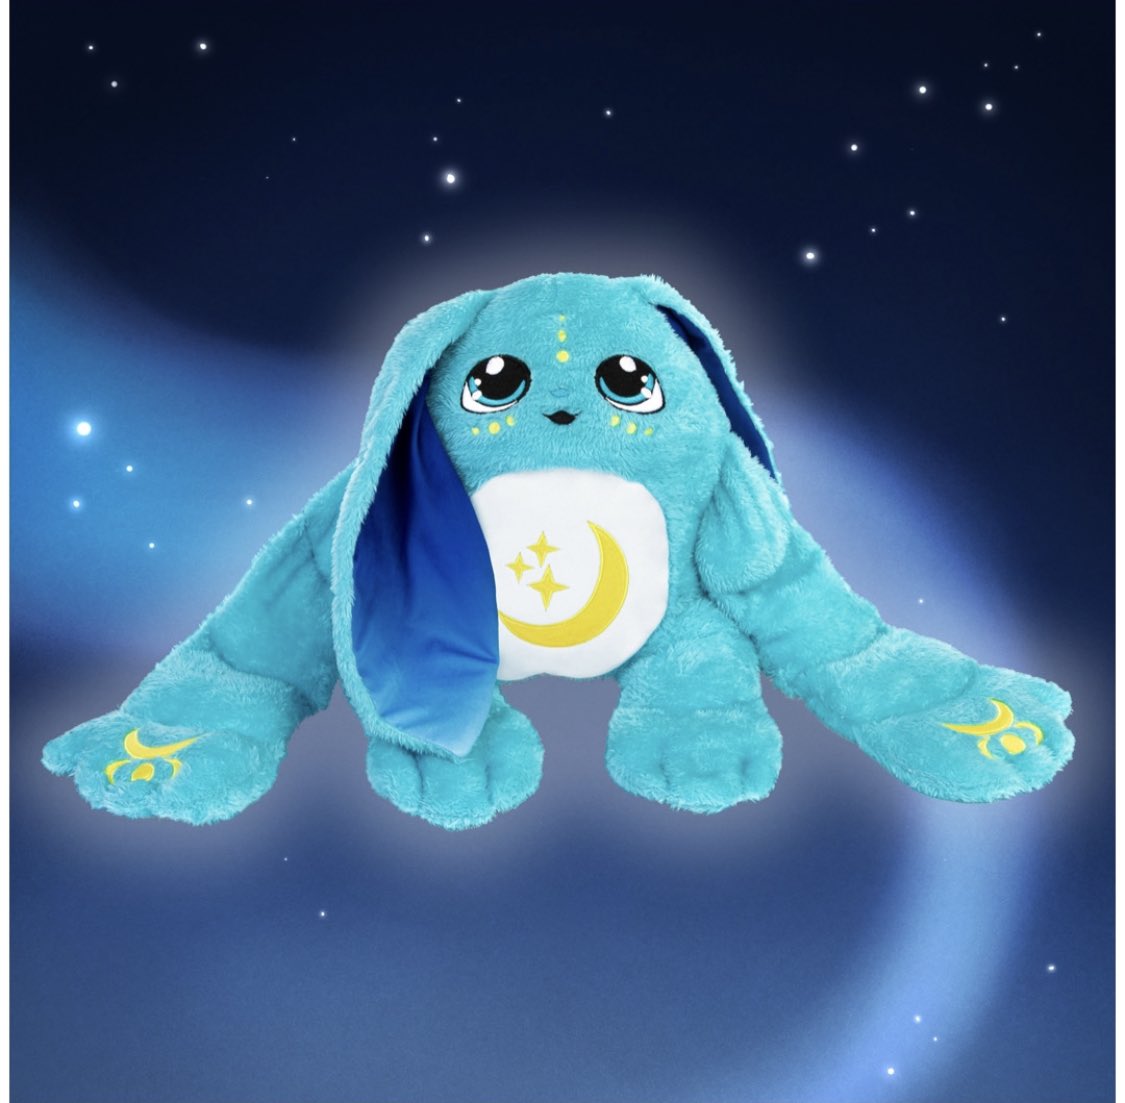 1 Weighted Stuffed Animal – Moon Pals